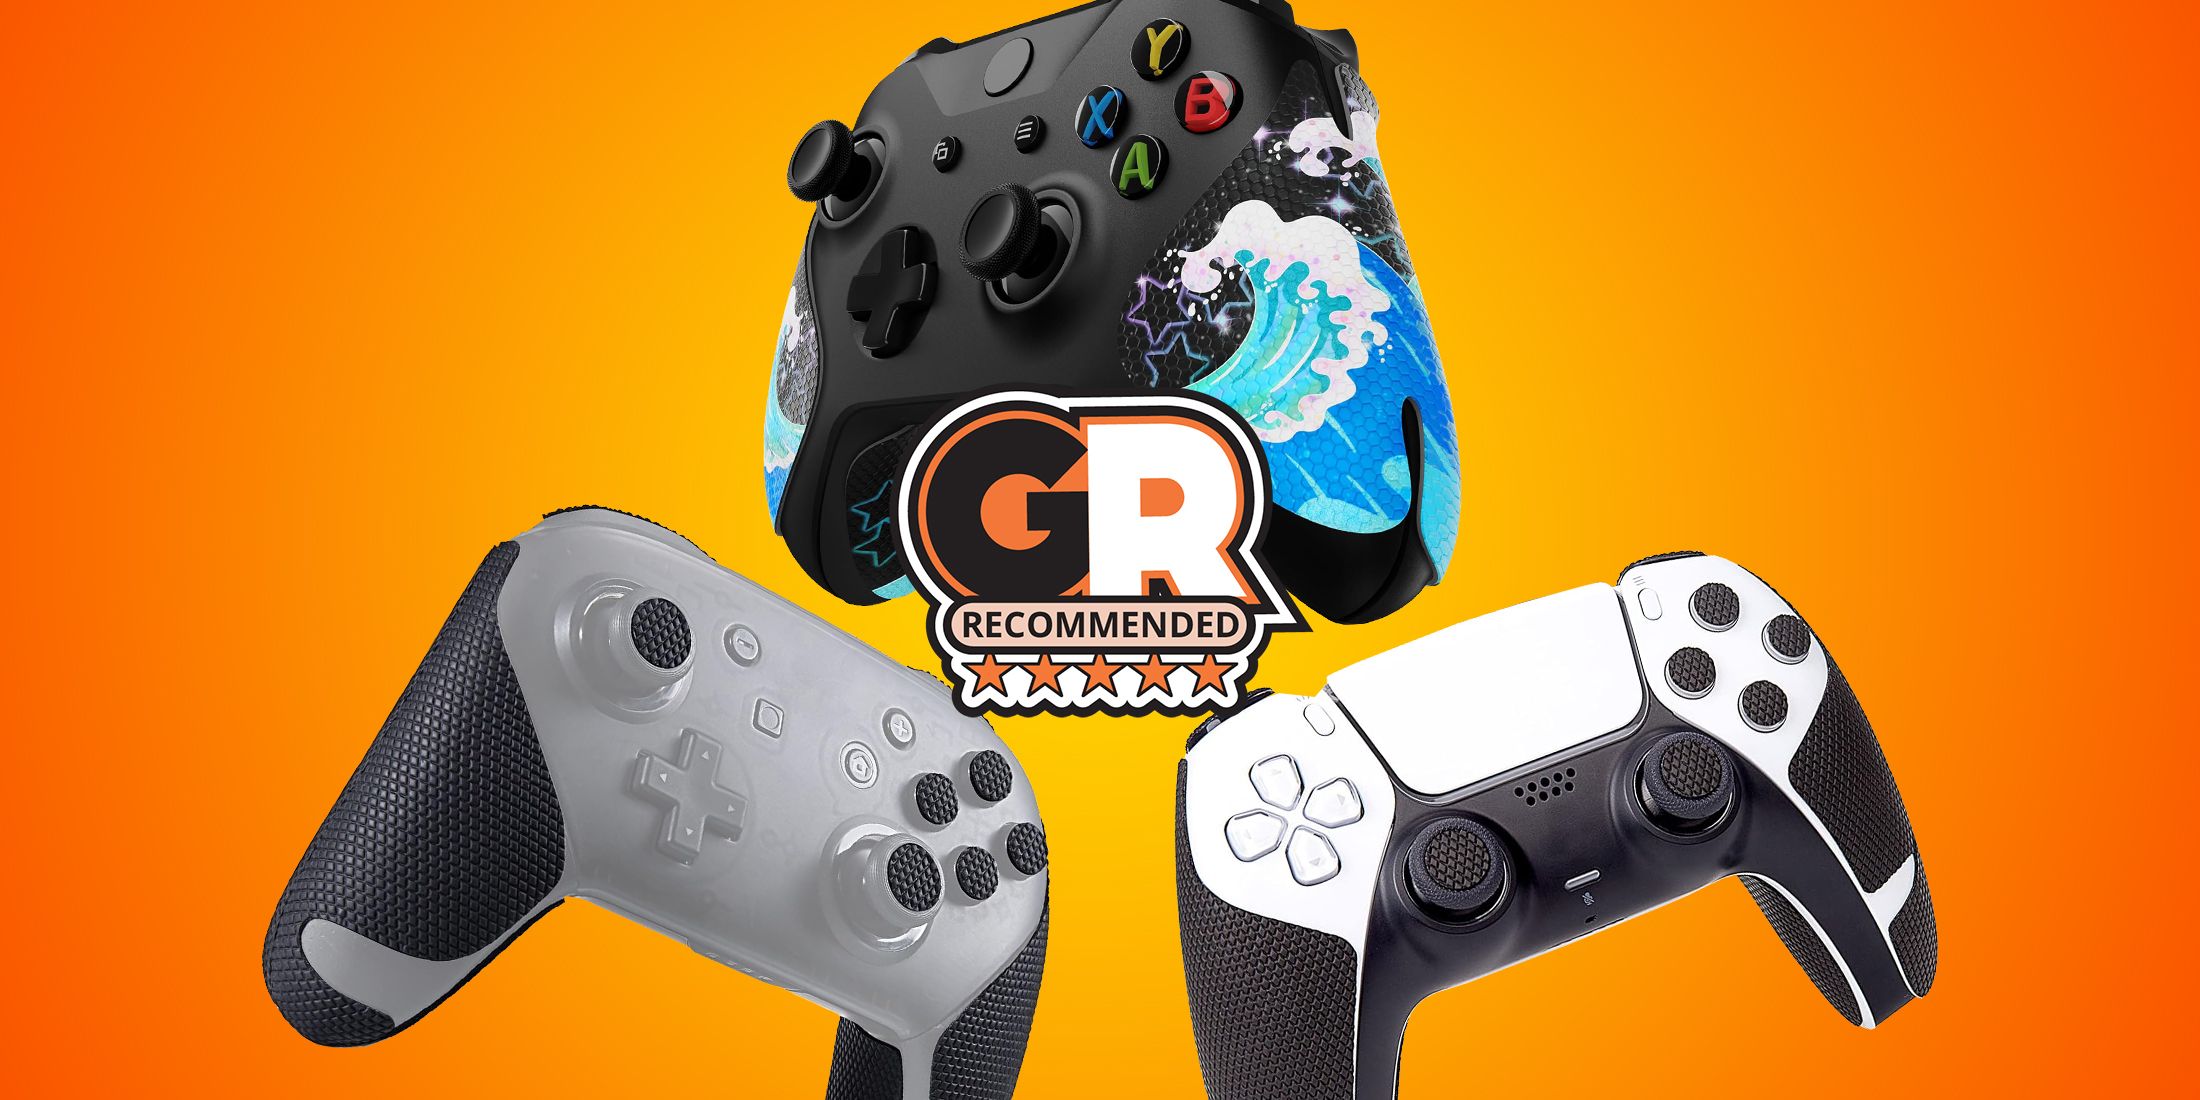 The Best Controller Grips That Won't Shy From Granting Unmatched Control